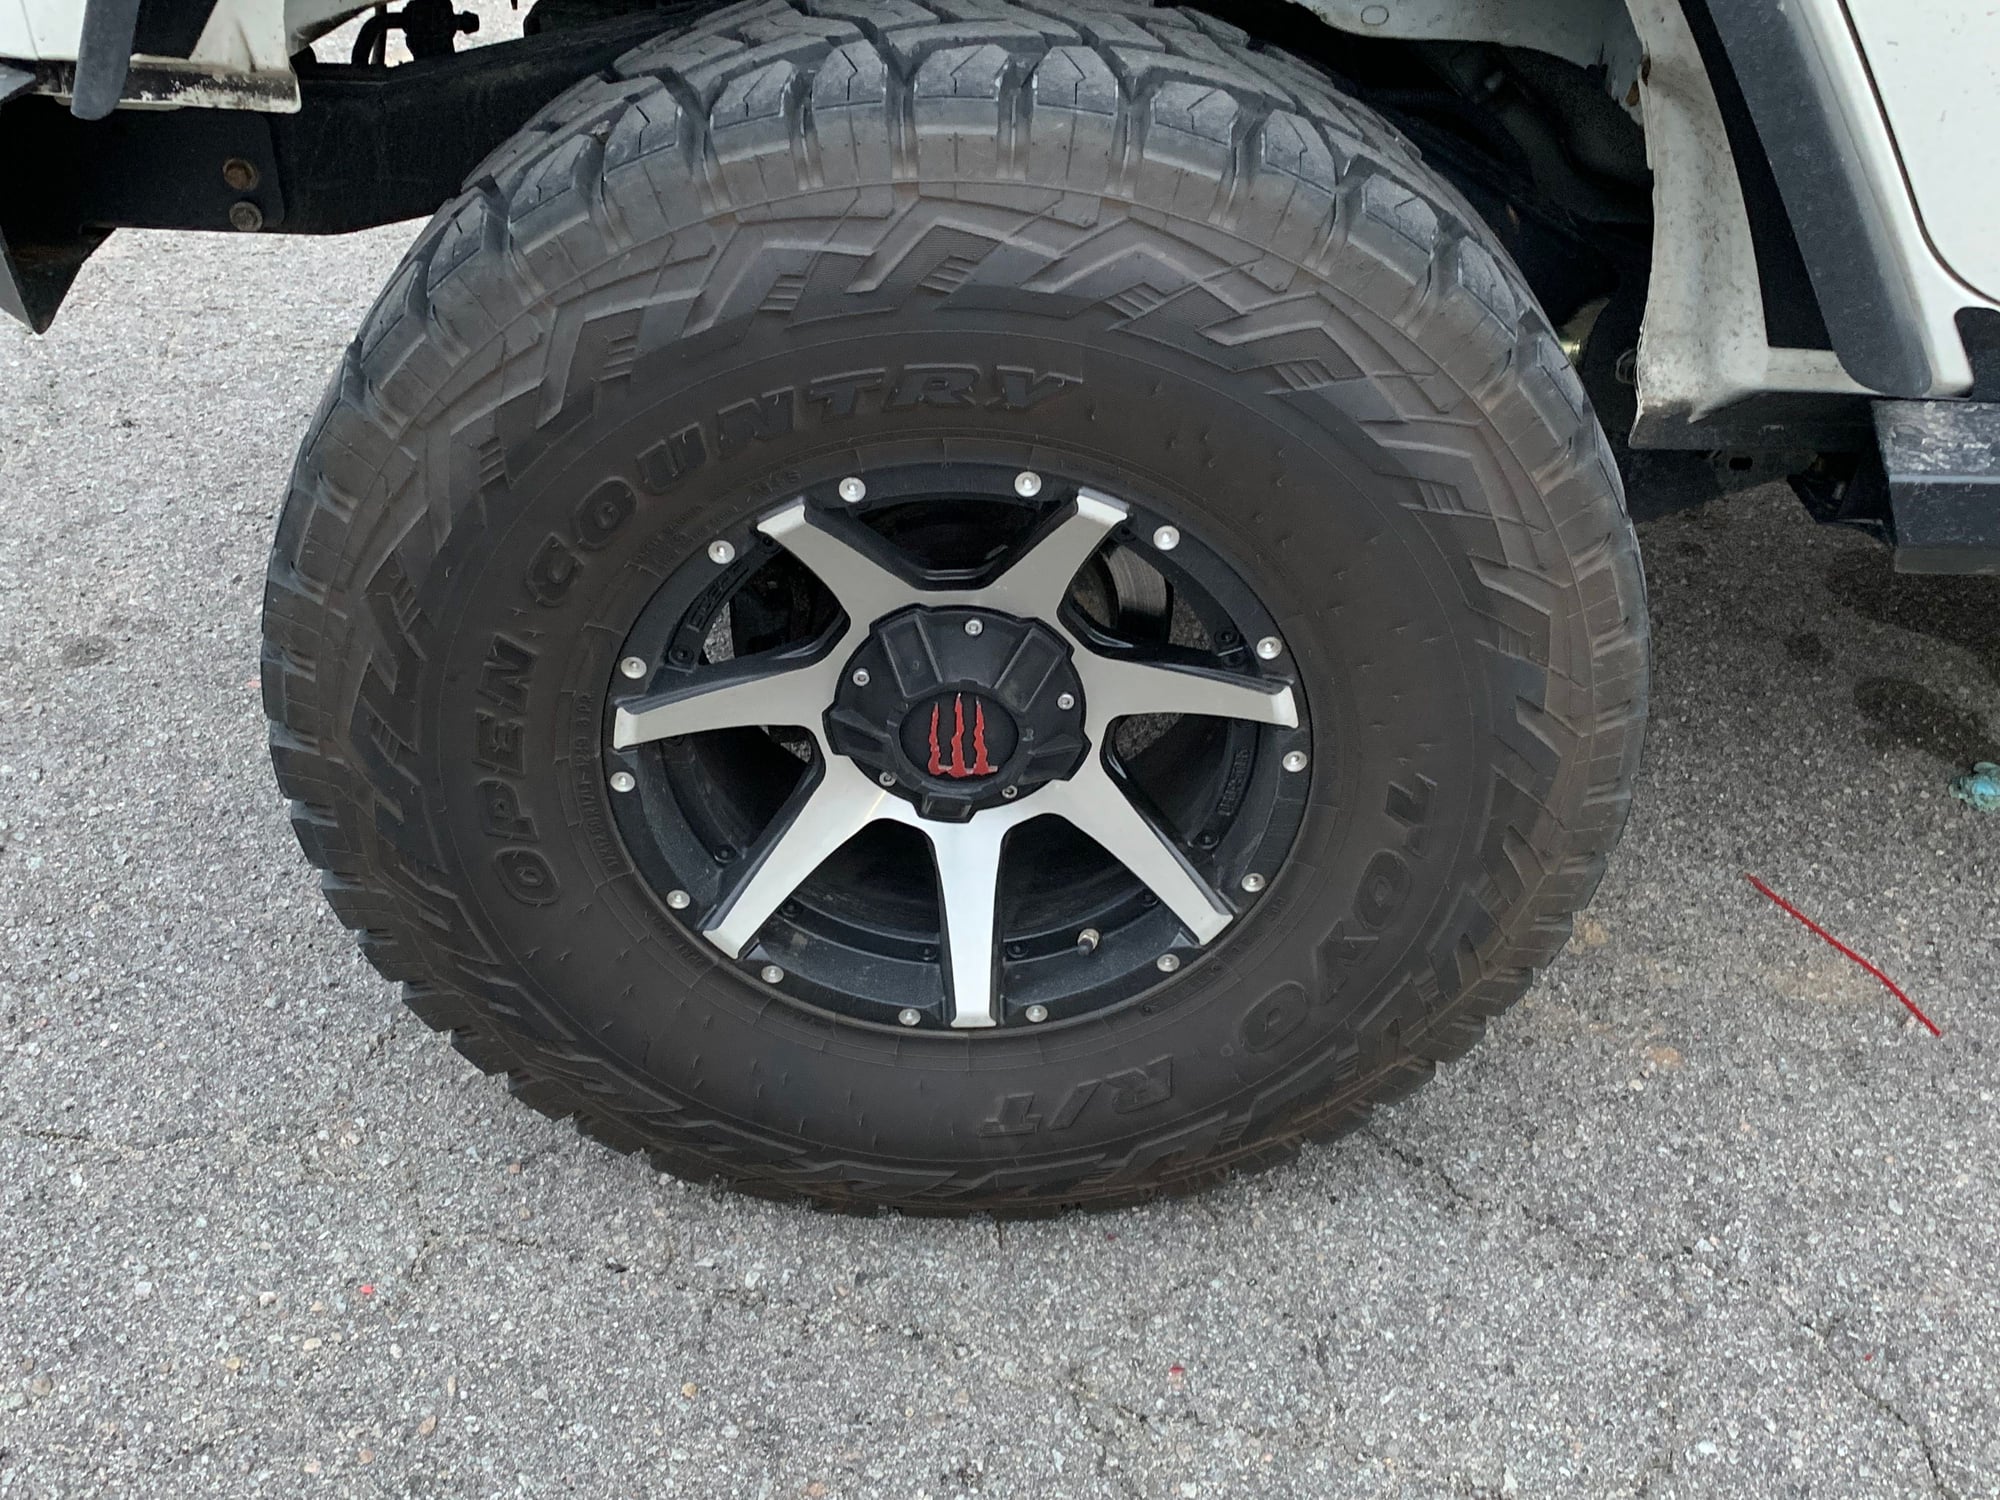 Wheels and Tires/Axles - 36/12.50R17 Toyo Open Country Rt tires - Used - Columbia, SC 29210, United States